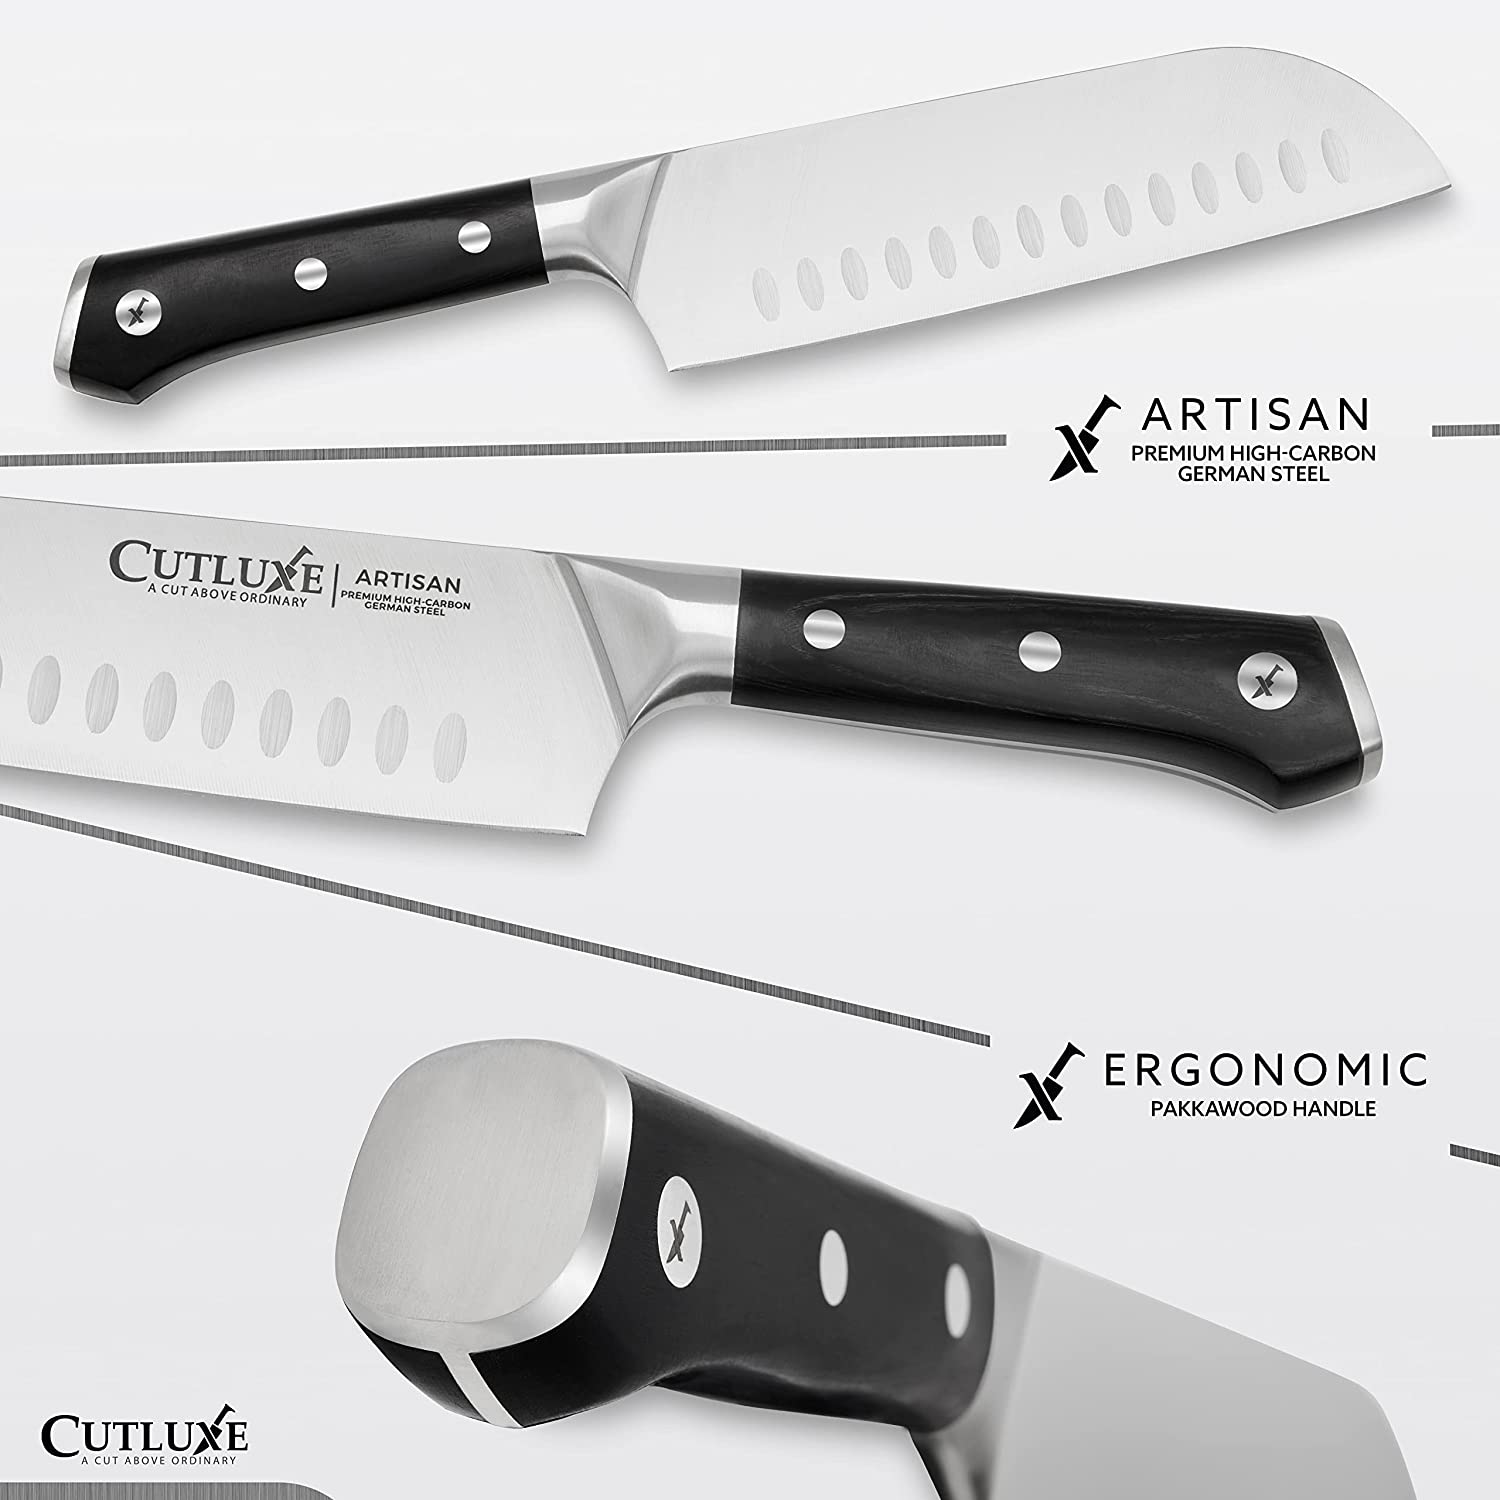 SpitJack Santoku Chef Utility Knife for Women and Men. Sharp Japanese Style Chefs Knives for Chopping and All Cooking Styles. Home Kitchen Gifts for